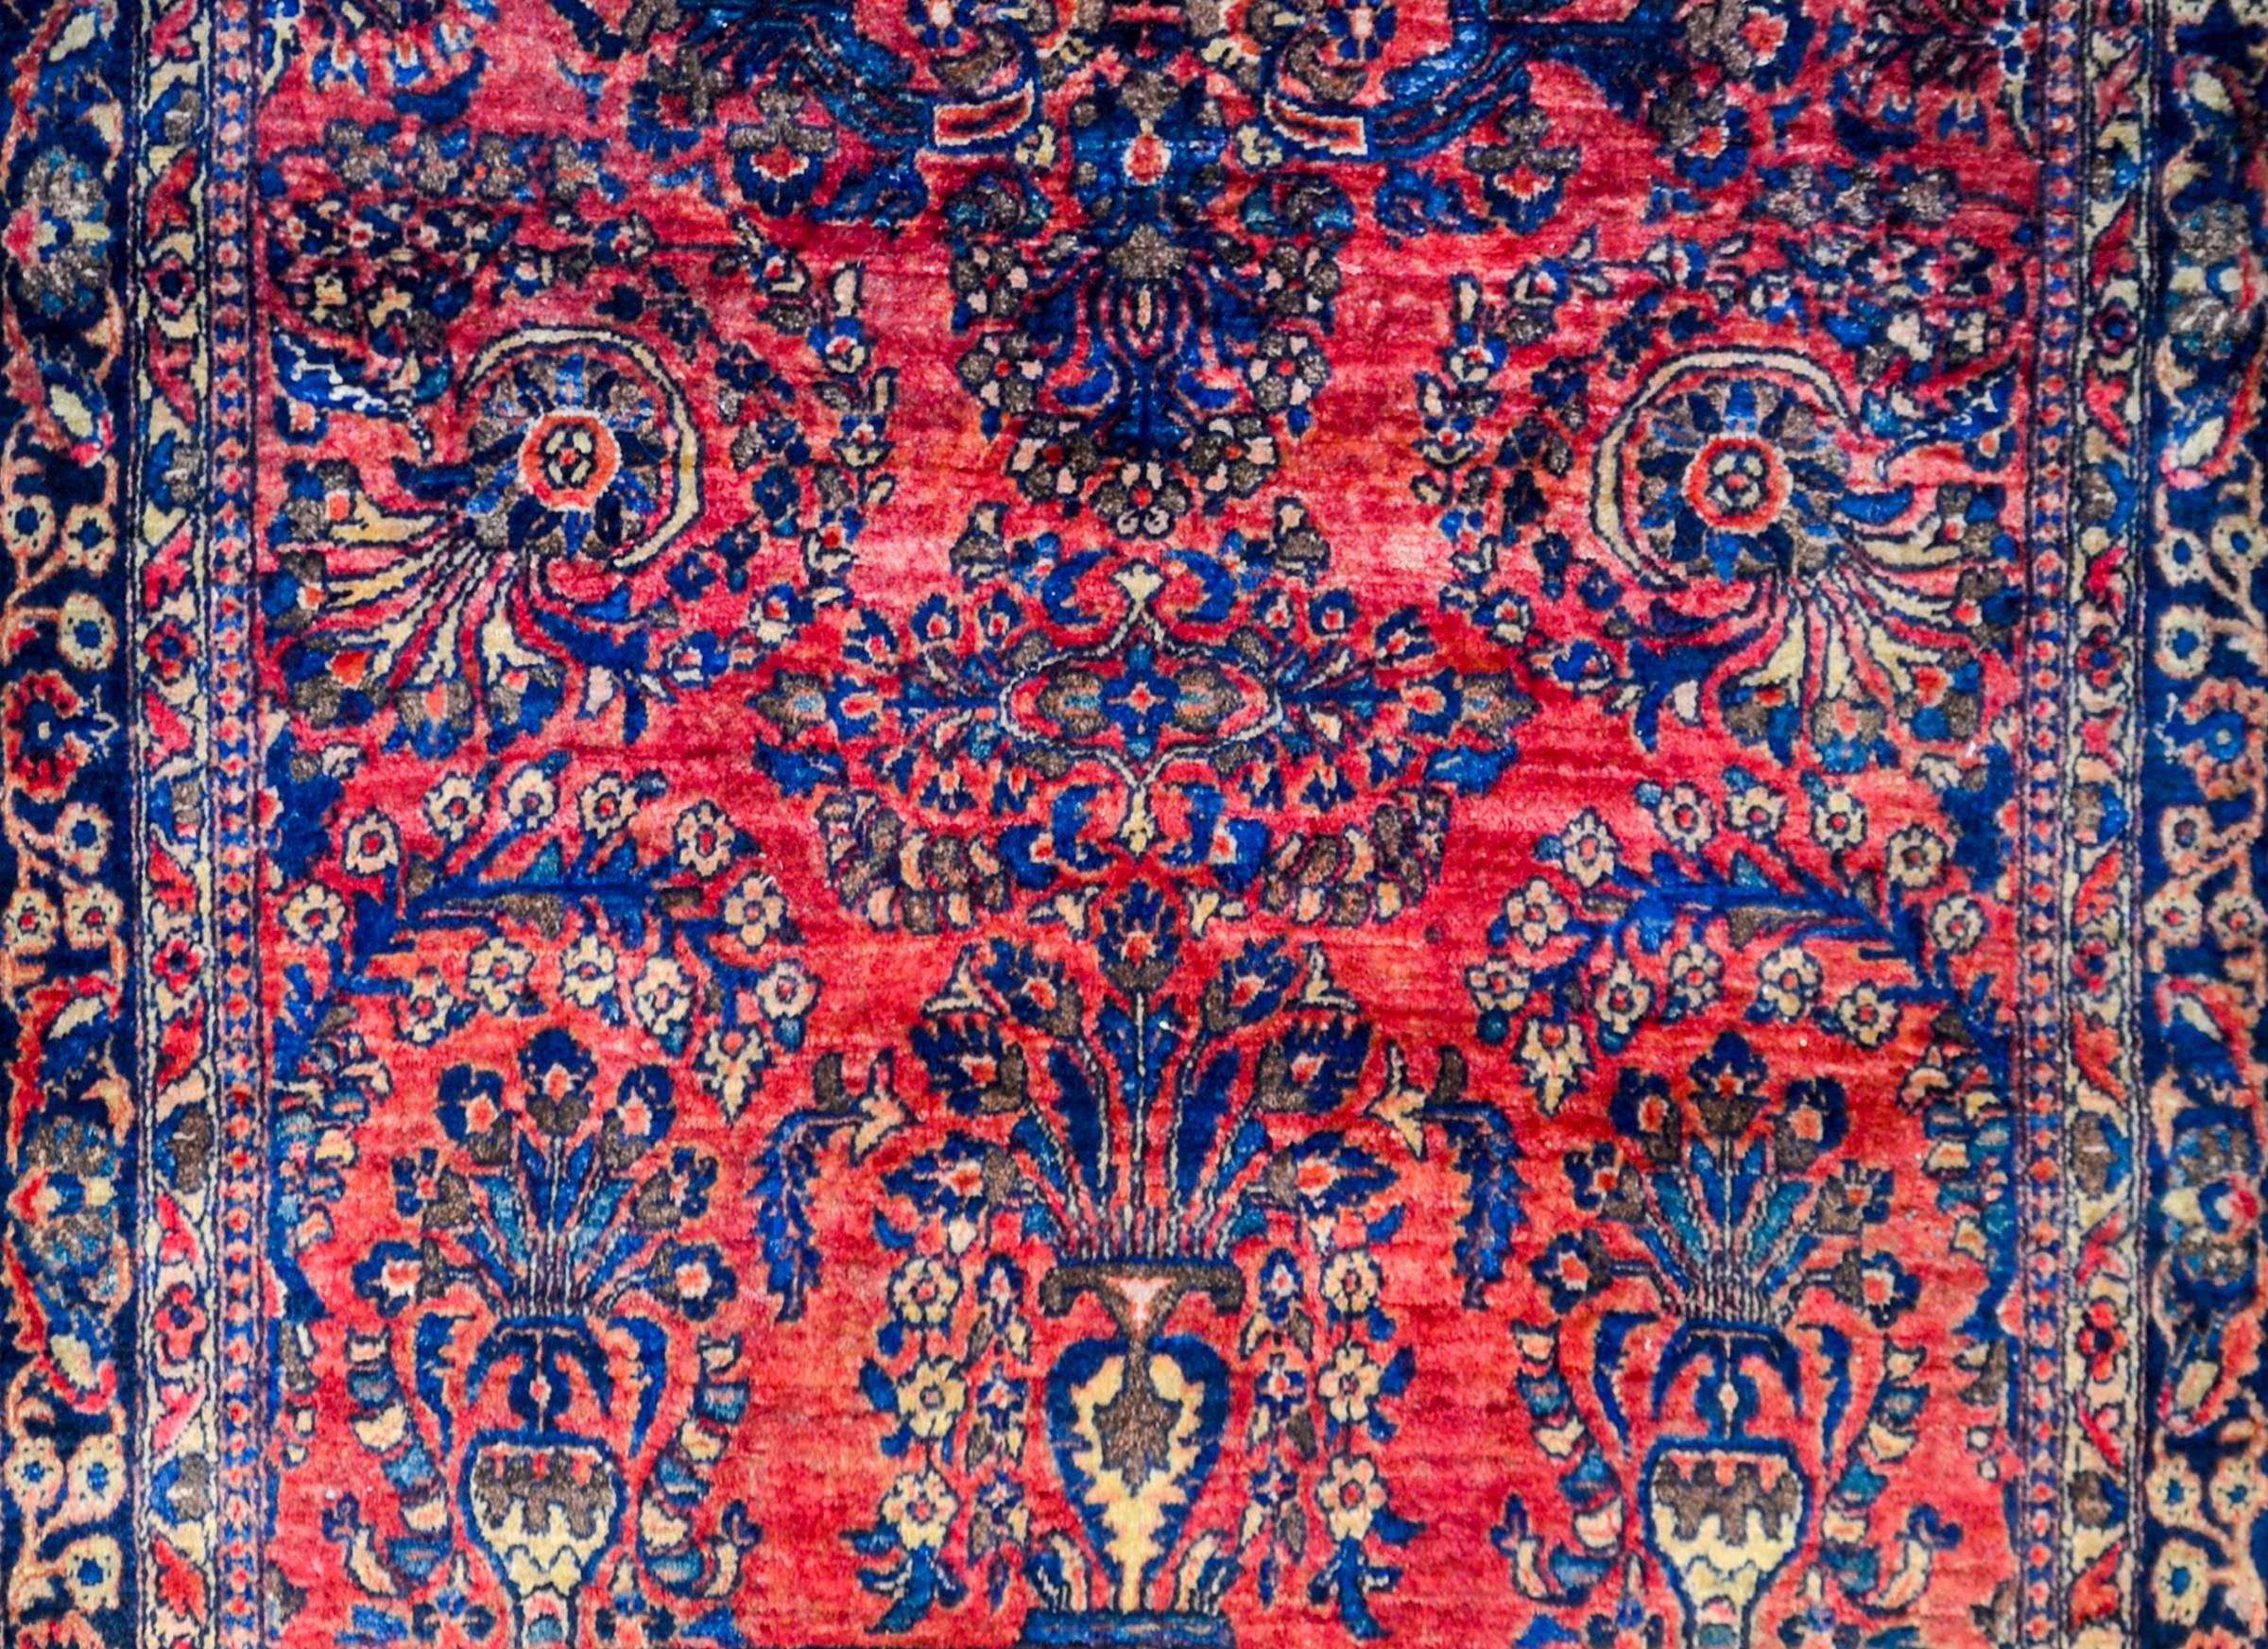 A beautiful early 20th century Persian Sarouk rug with a fantastic mirrored floral and vine pattern, expertly rendered, in light and dark indigo, pink, and natural undyed wool, on a bold cranberry background. The border is wide, with a wide stripe